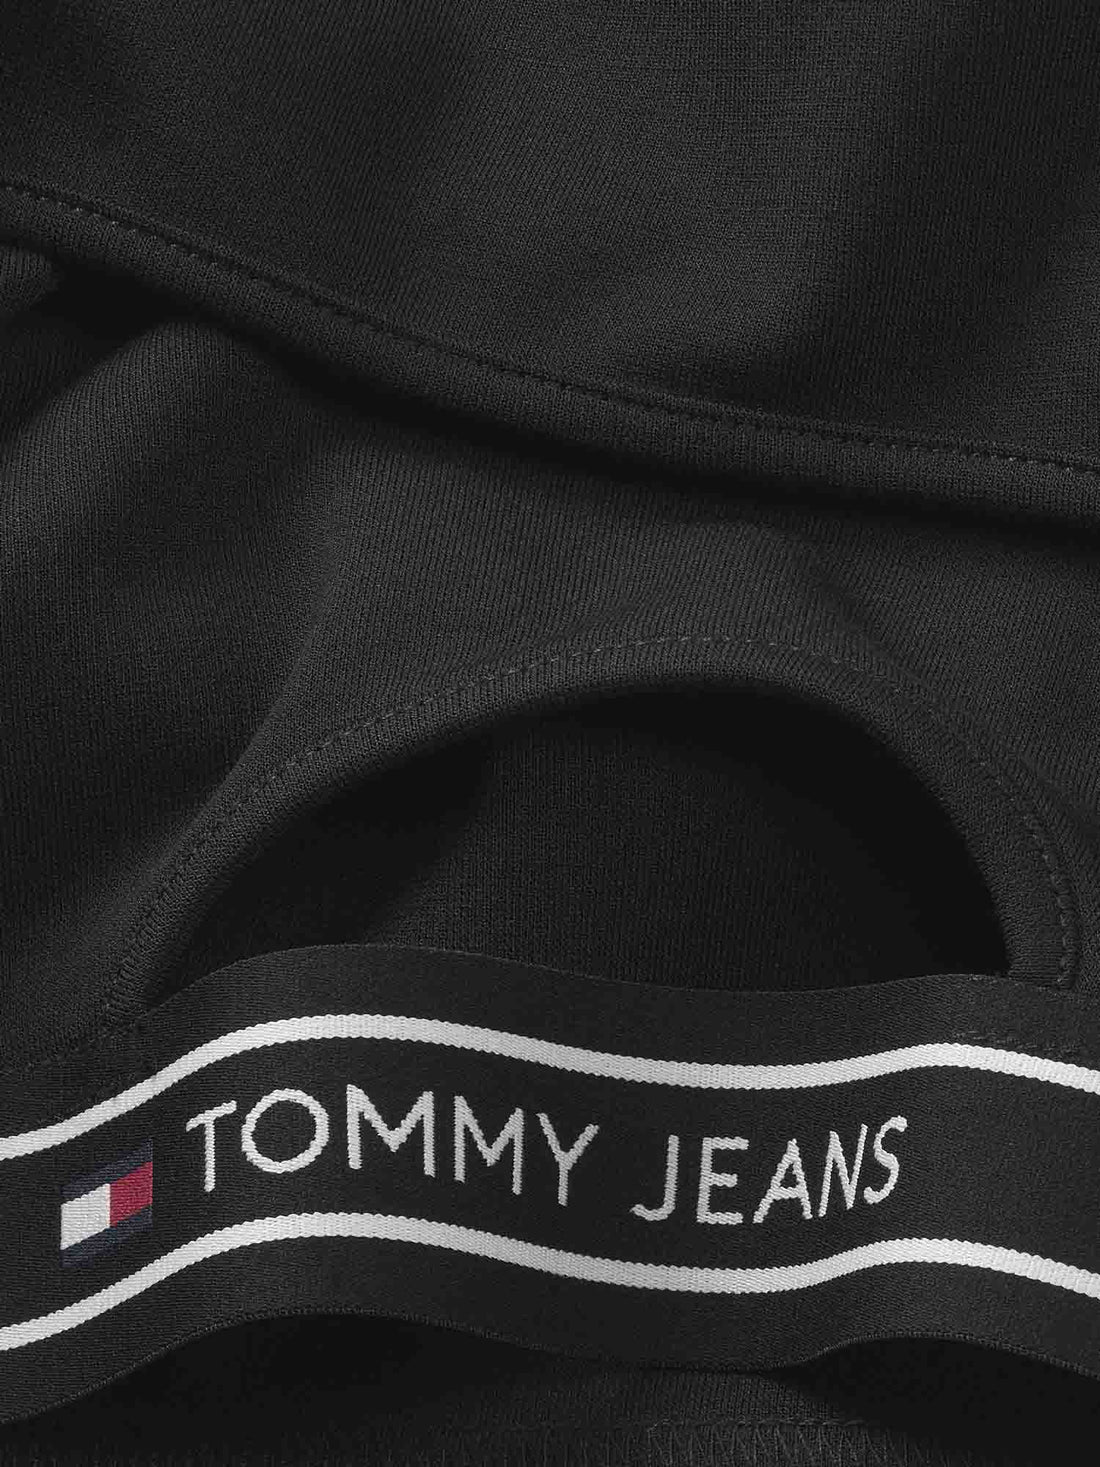 Top e canotte Nero Tommy Jeans